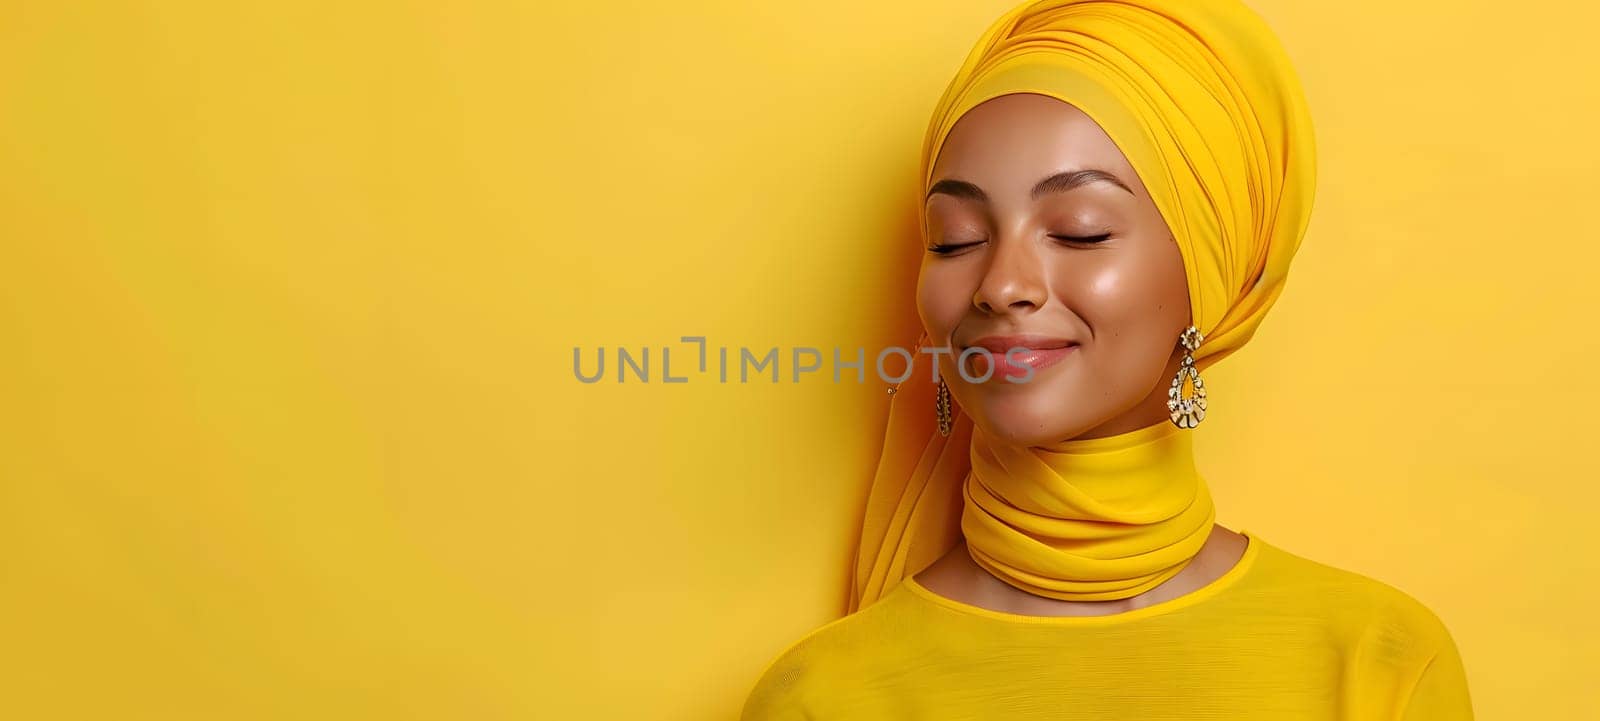 A woman with long hair wearing a yellow hijab and shirt is smiling with her eyes closed. Her jaw is relaxed, and she exudes a happy gesture with a hint of a scarf as a fashion accessory